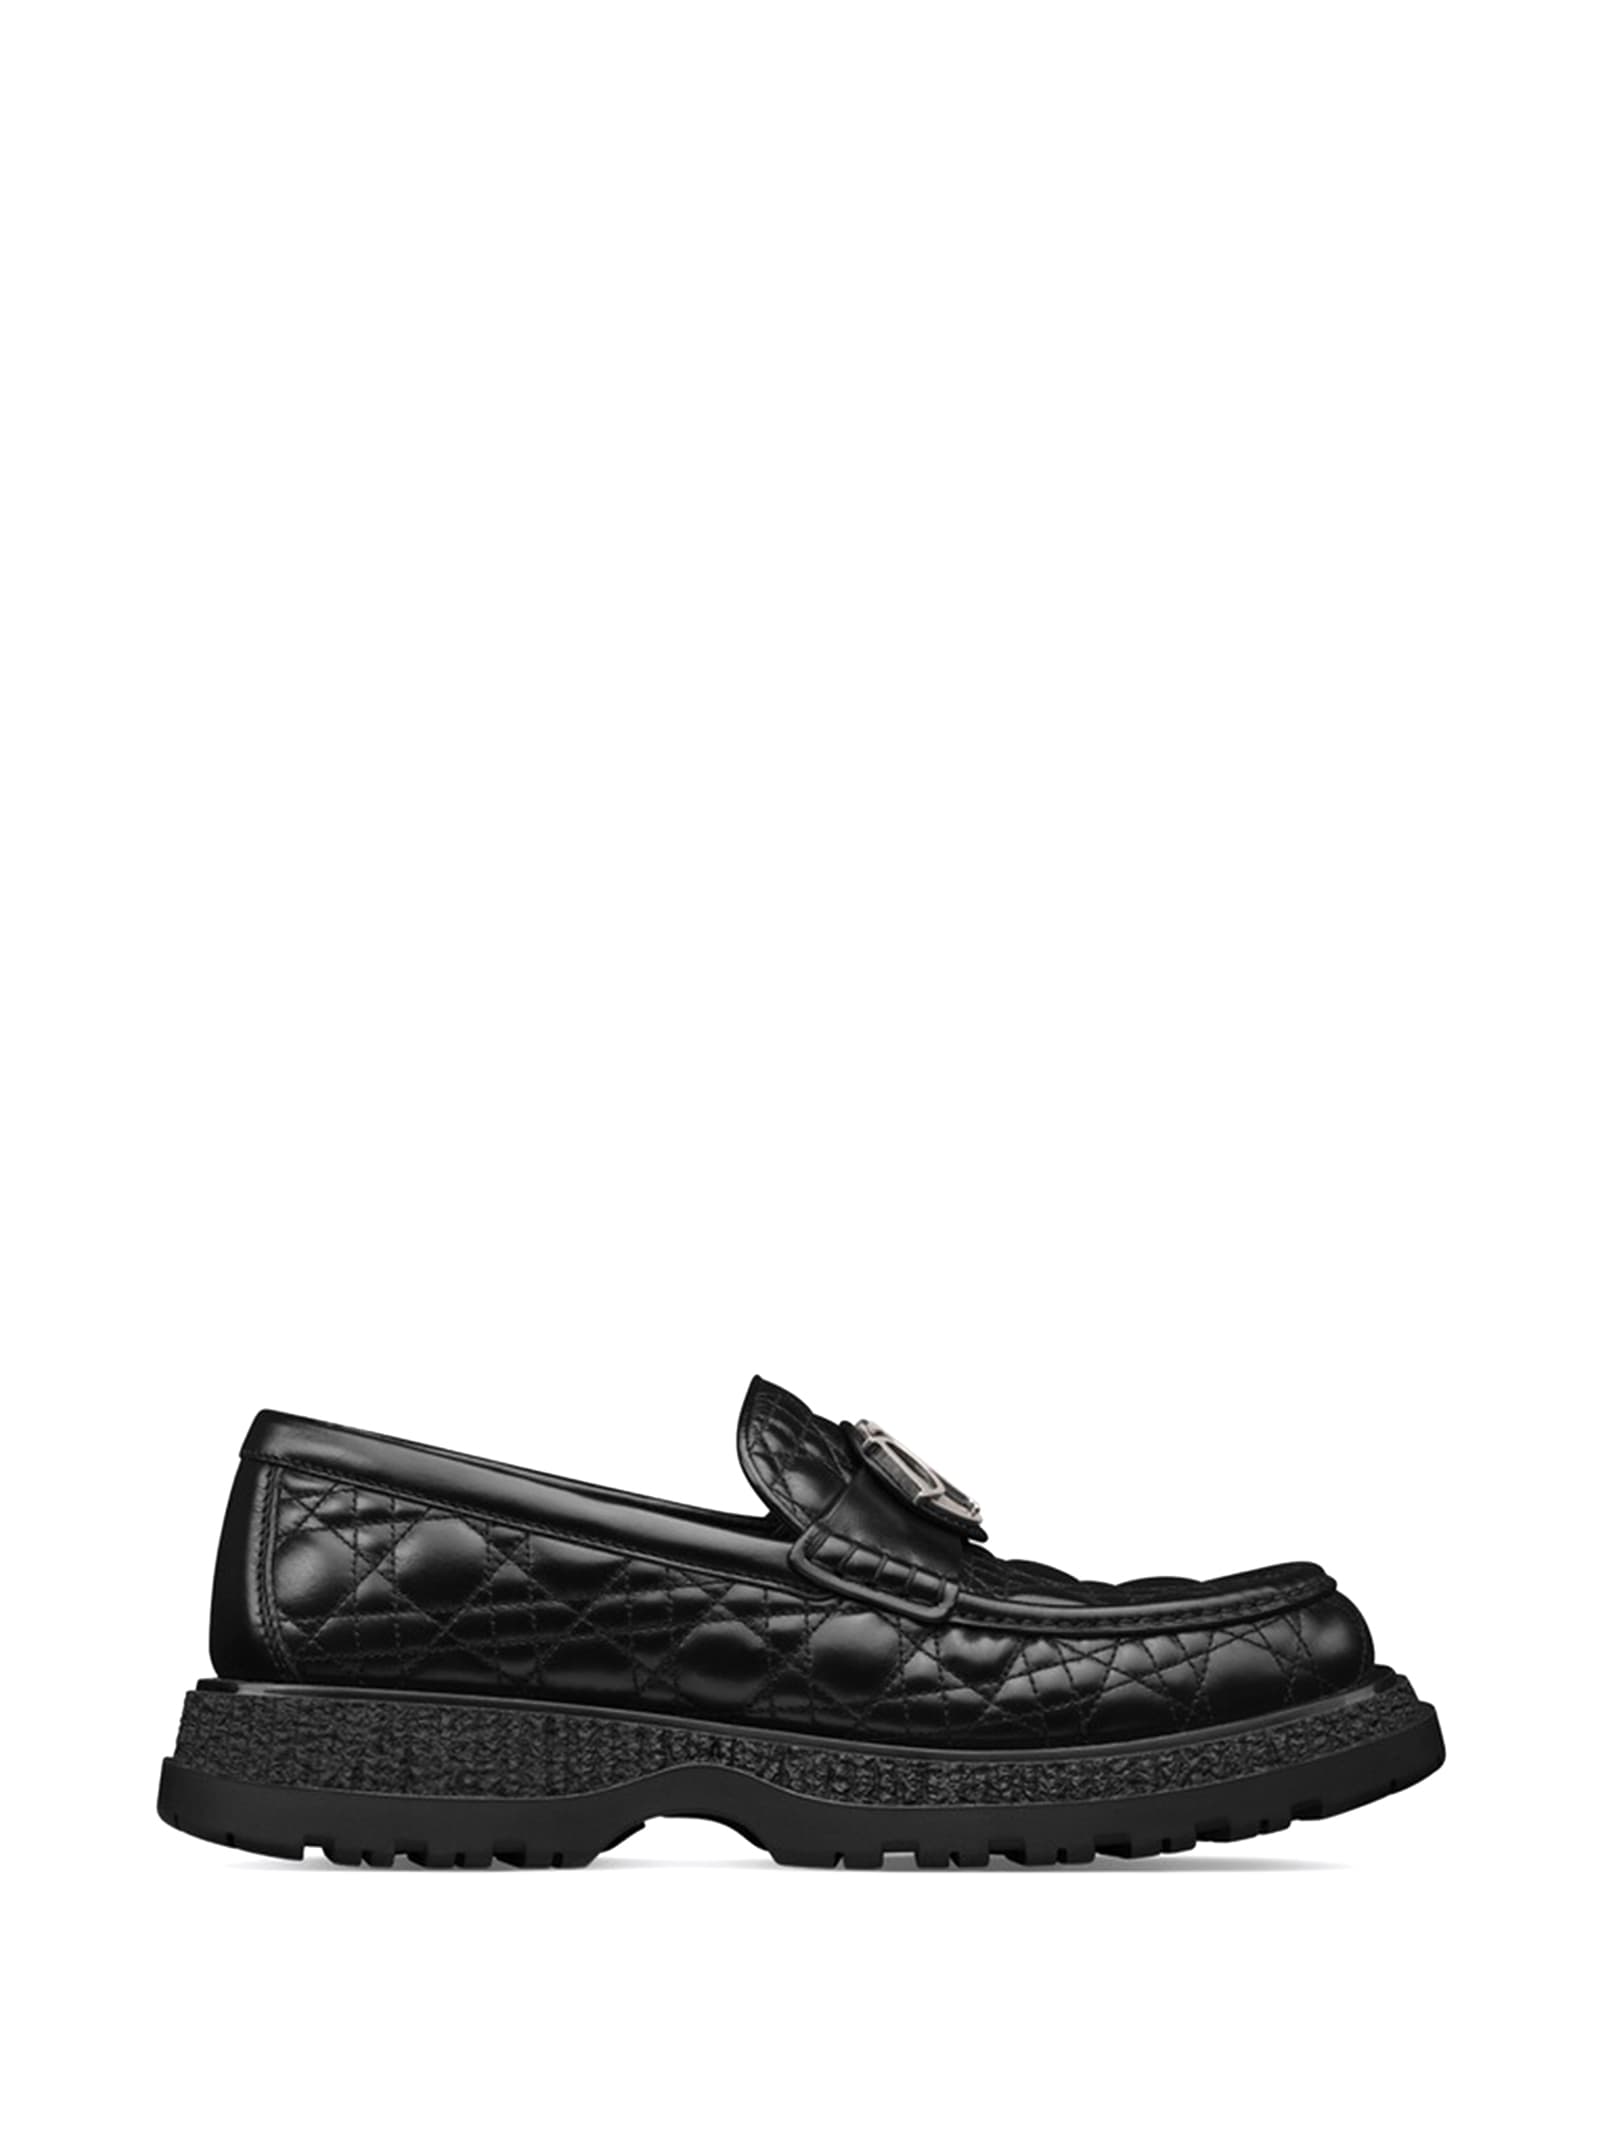 Dior Homme Loafers